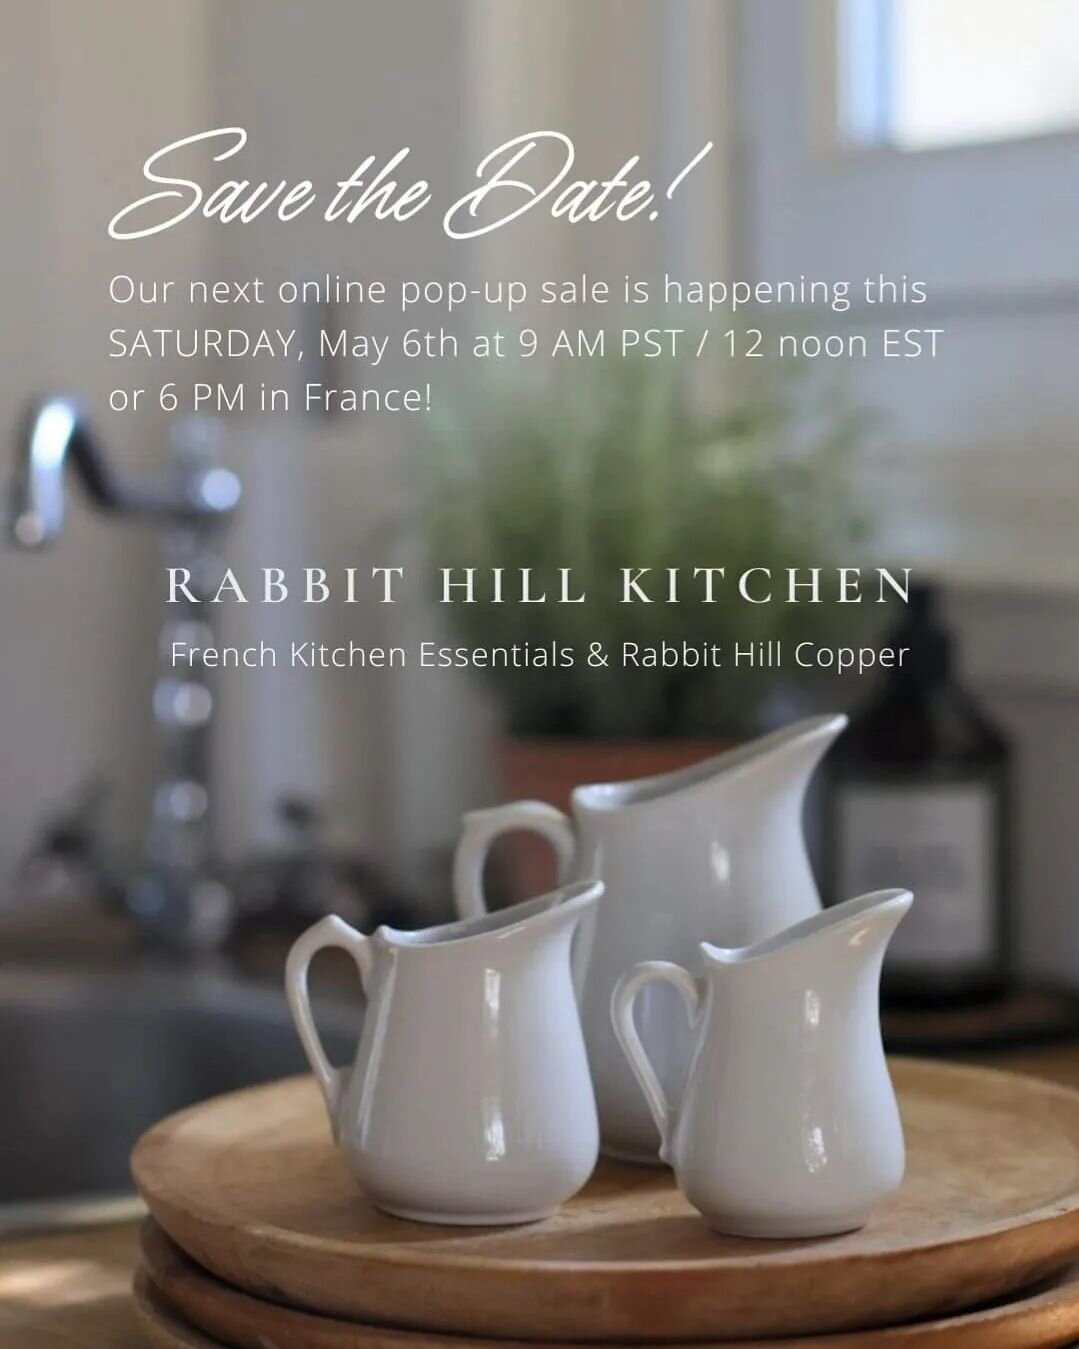 It's that time again! Our May online pop-up sale is happening this Saturday! 

With flea market weekends back in season, we have so many French vintage items for the shop! Plus gorgeous Rabbit Hill Copper cookware and decorative items ready for your 